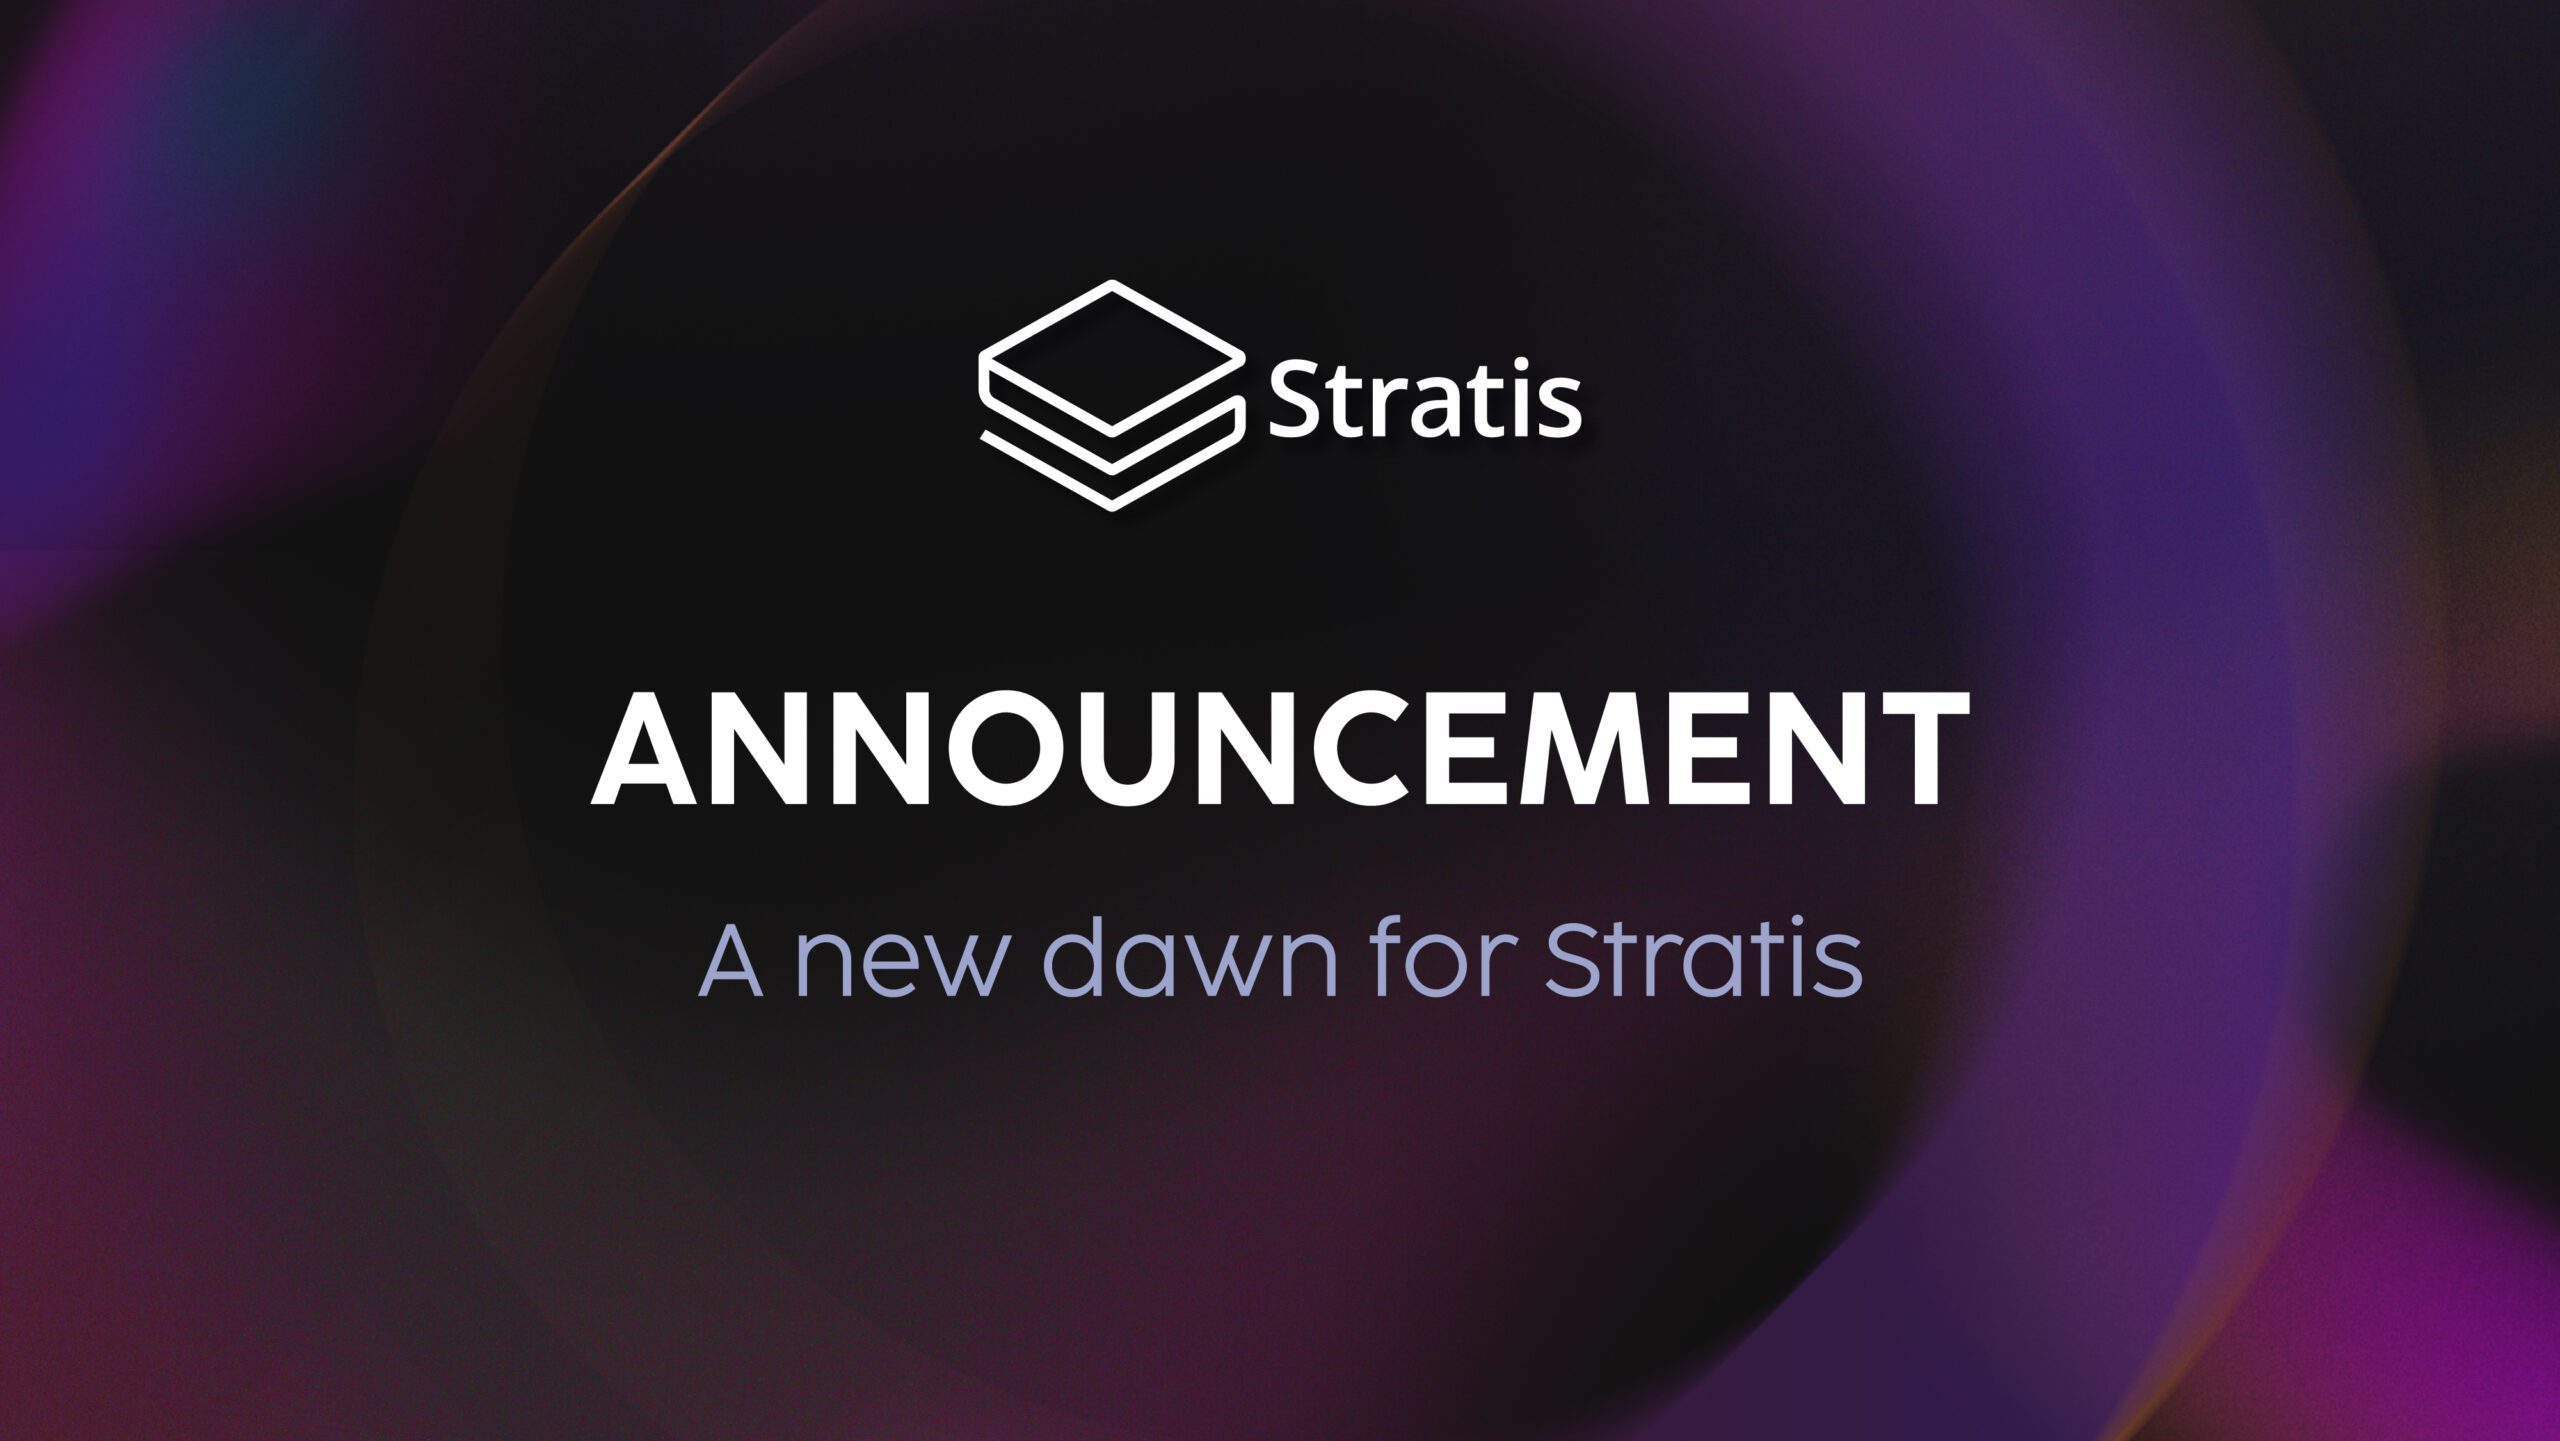 A new dawn for Stratis